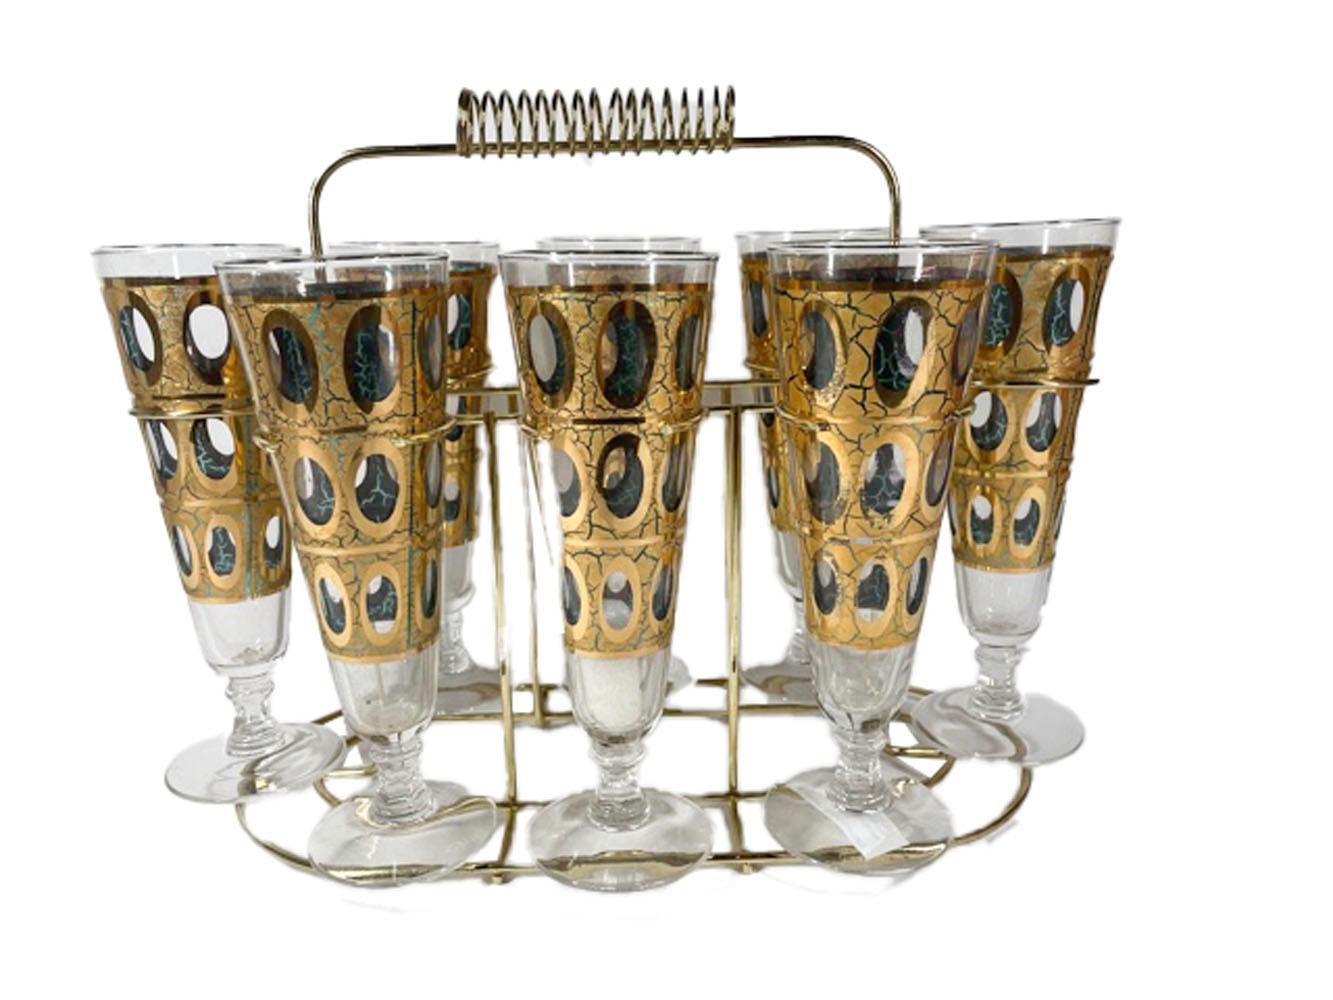 Mid-century pilsner glasses in the Pisa pattern by Culver Glass Co., together with a hard-to-find pilsner caddy. The Pisa pattern has rows of ovel openings in 22 karat gold with a crackled surface over translucent green enamel, allowing the green to